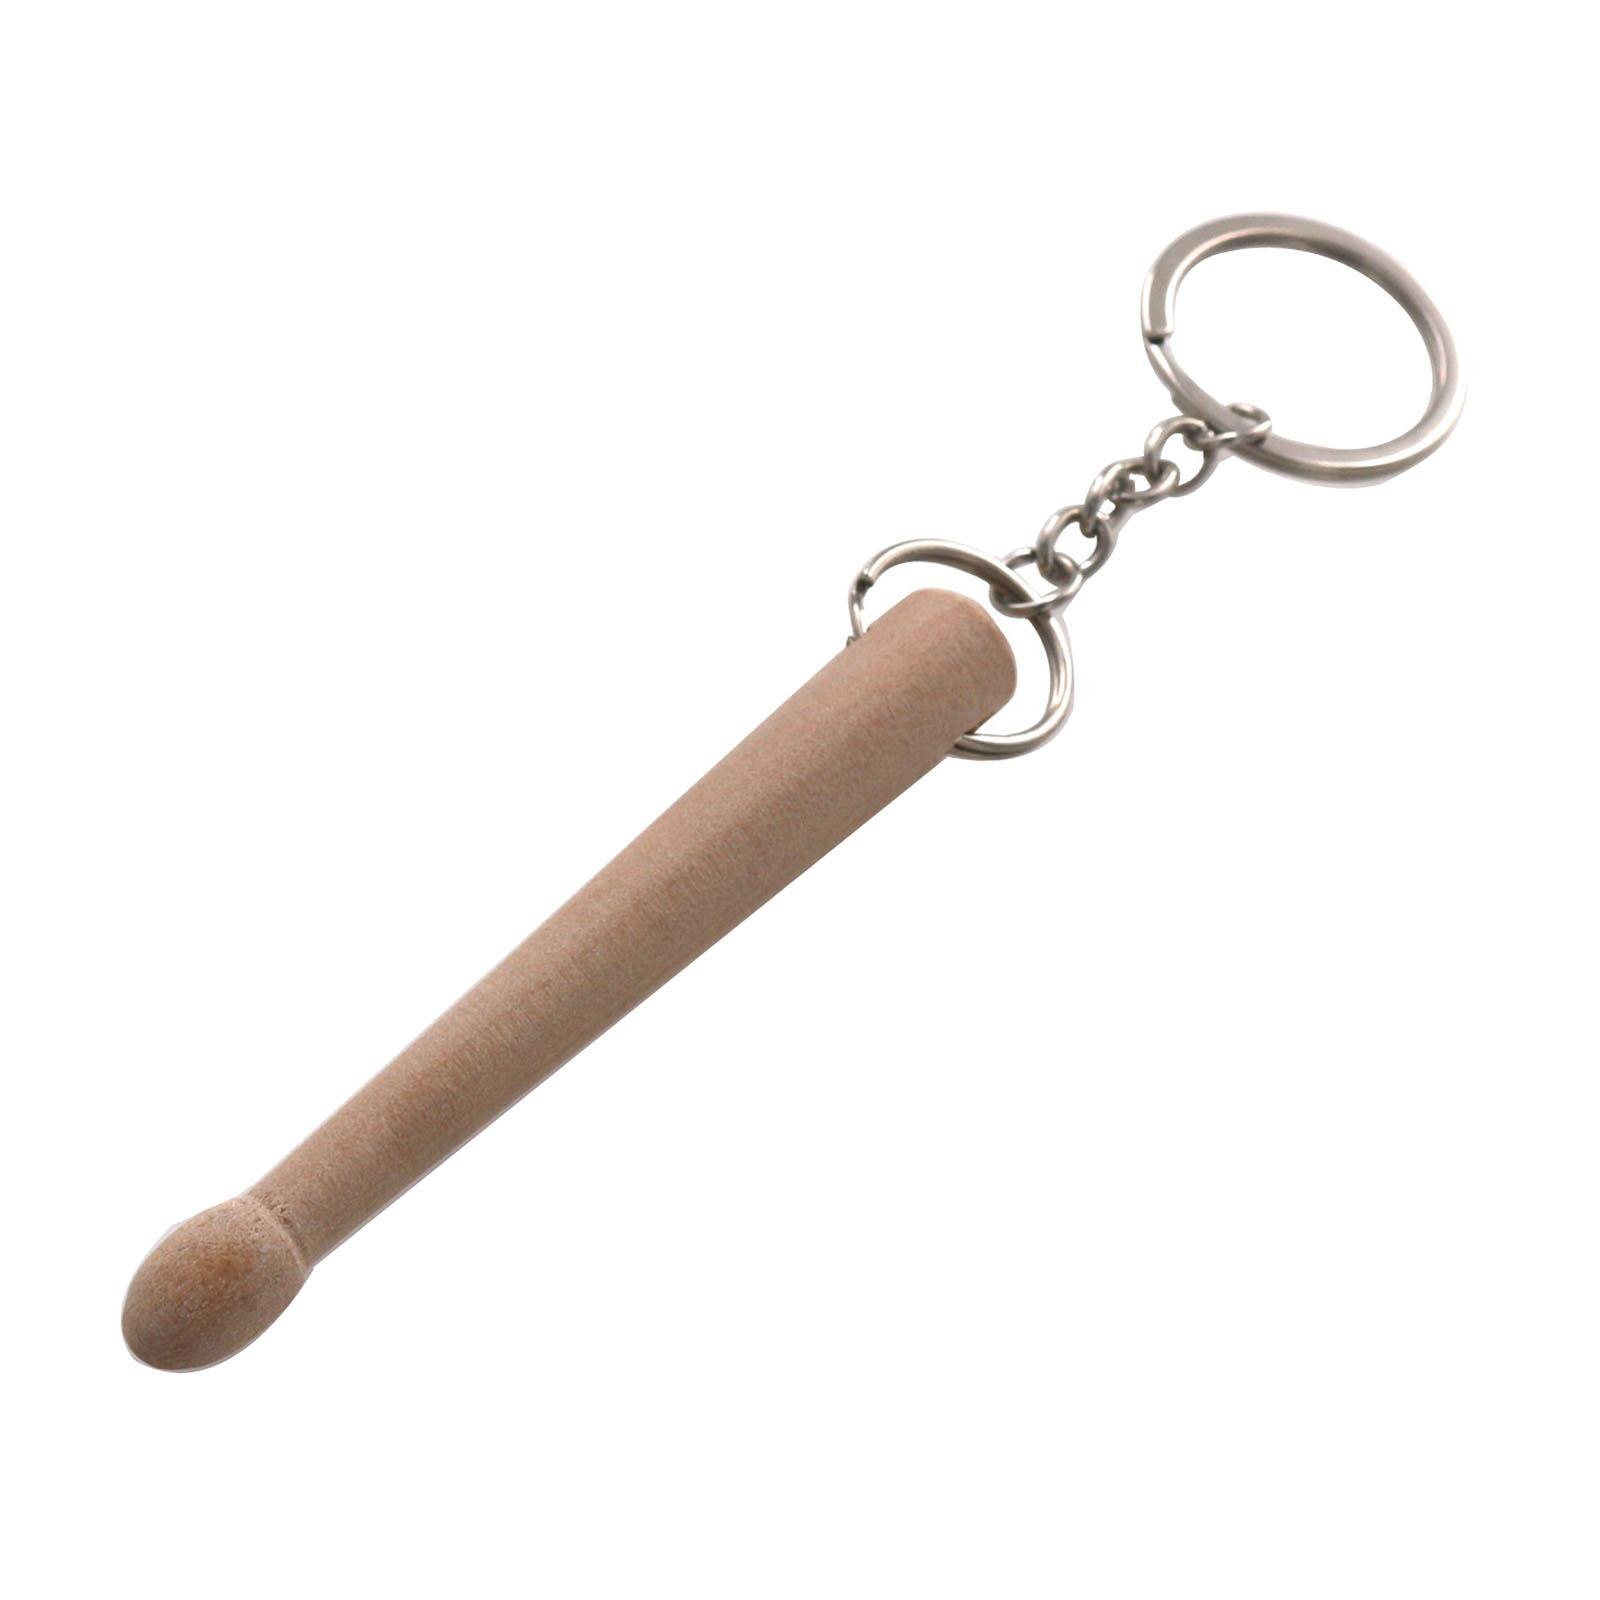 Mini Drumstick Keychain Wood Keychain Drumsticks Percussion Key Chain for Backpack